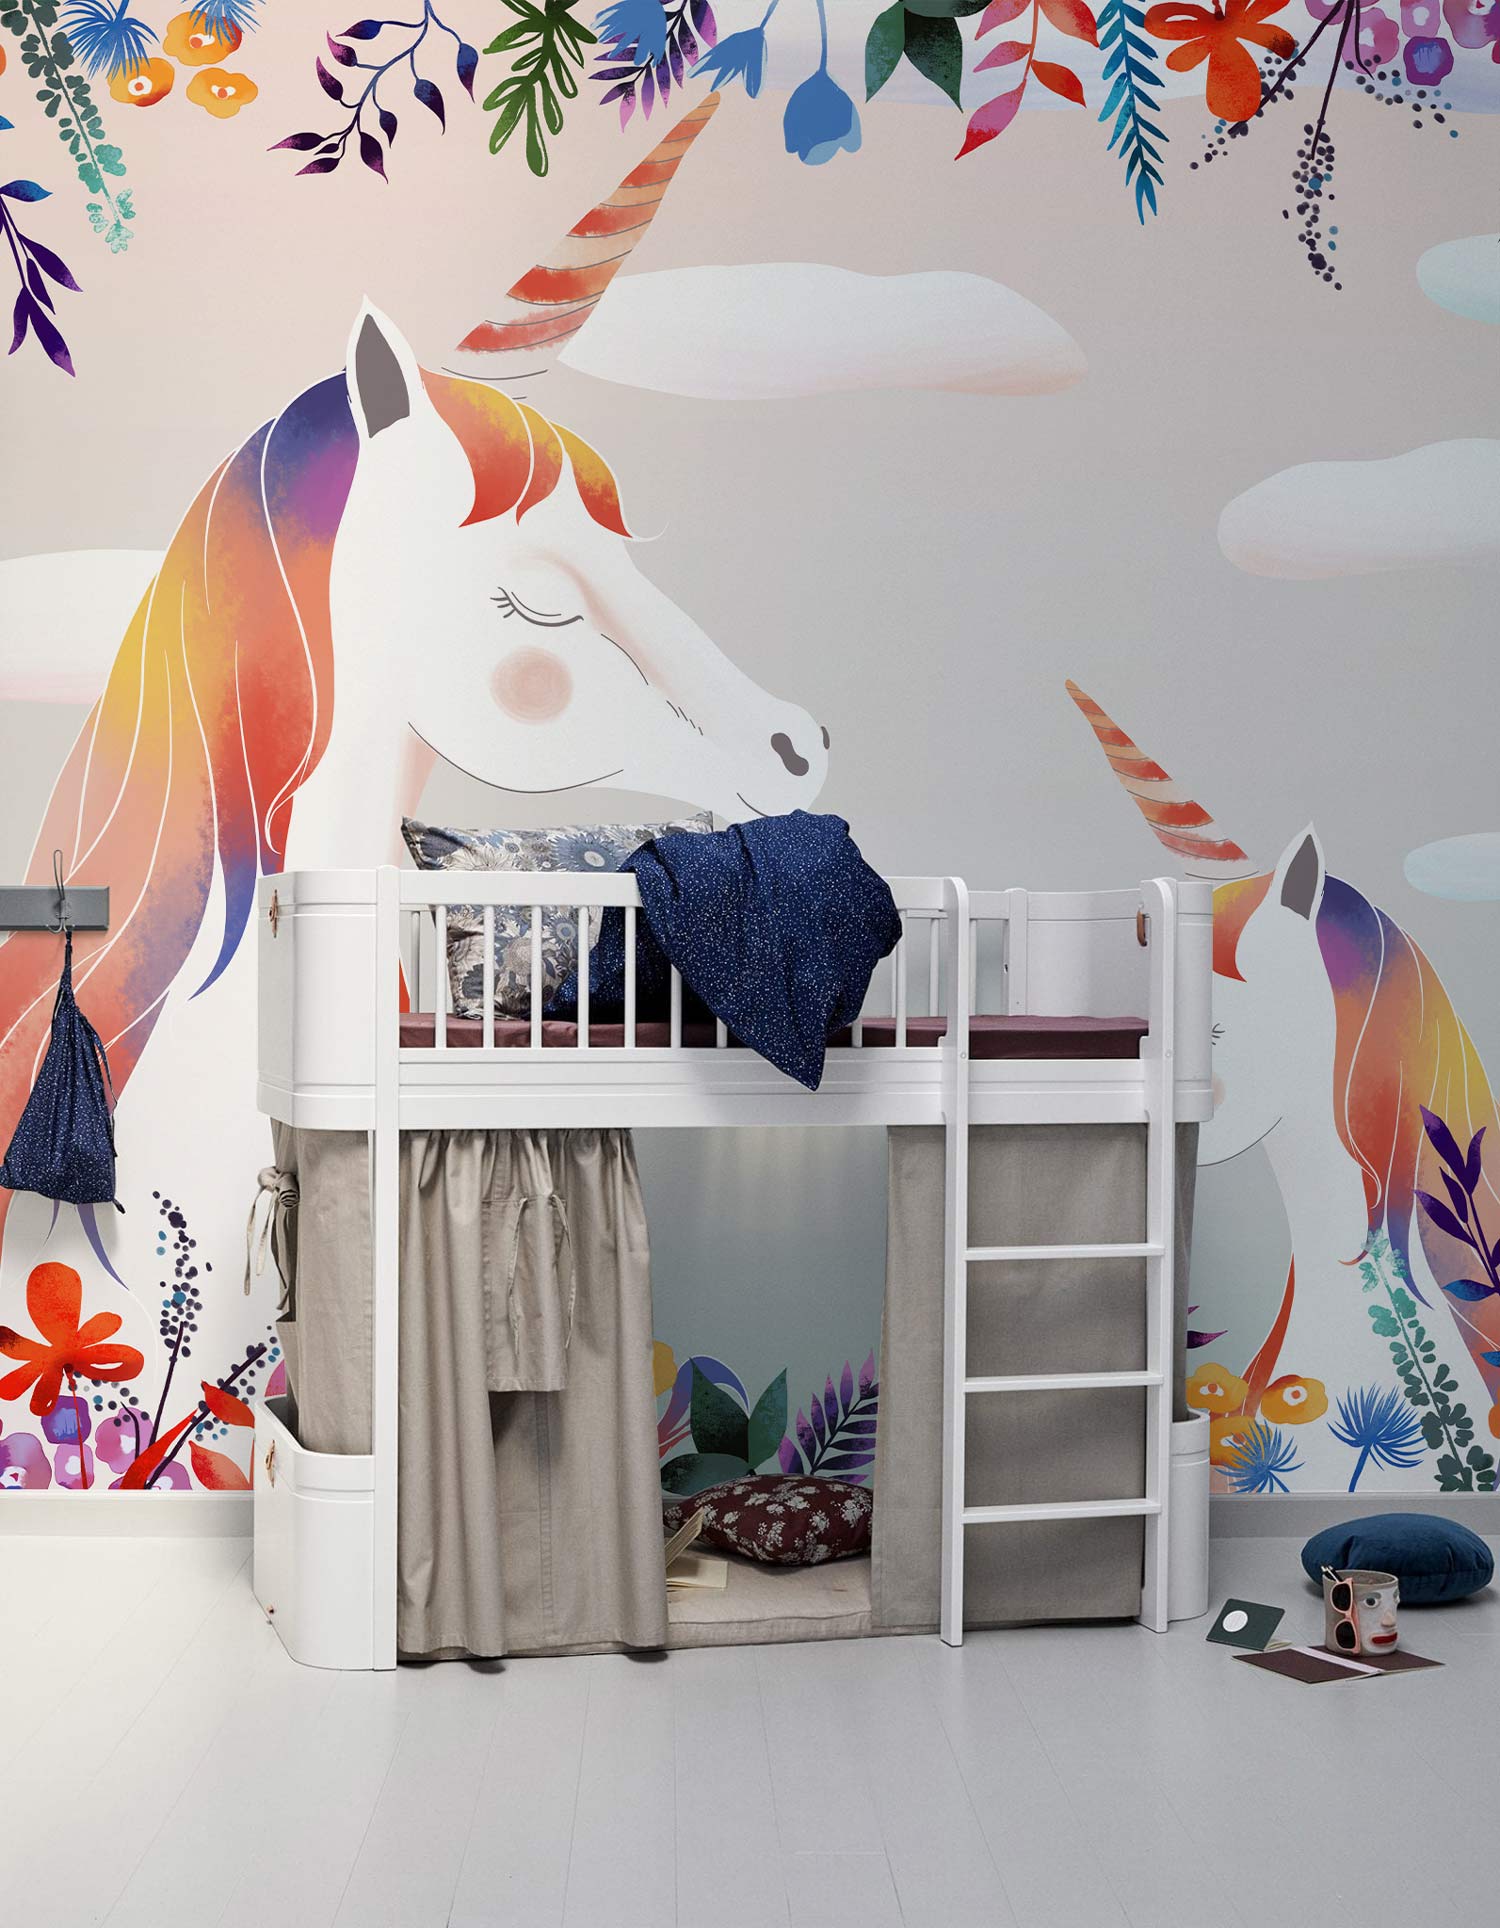 Wallpaper mural with unicorns and other animals, perfect for decorating a child's room